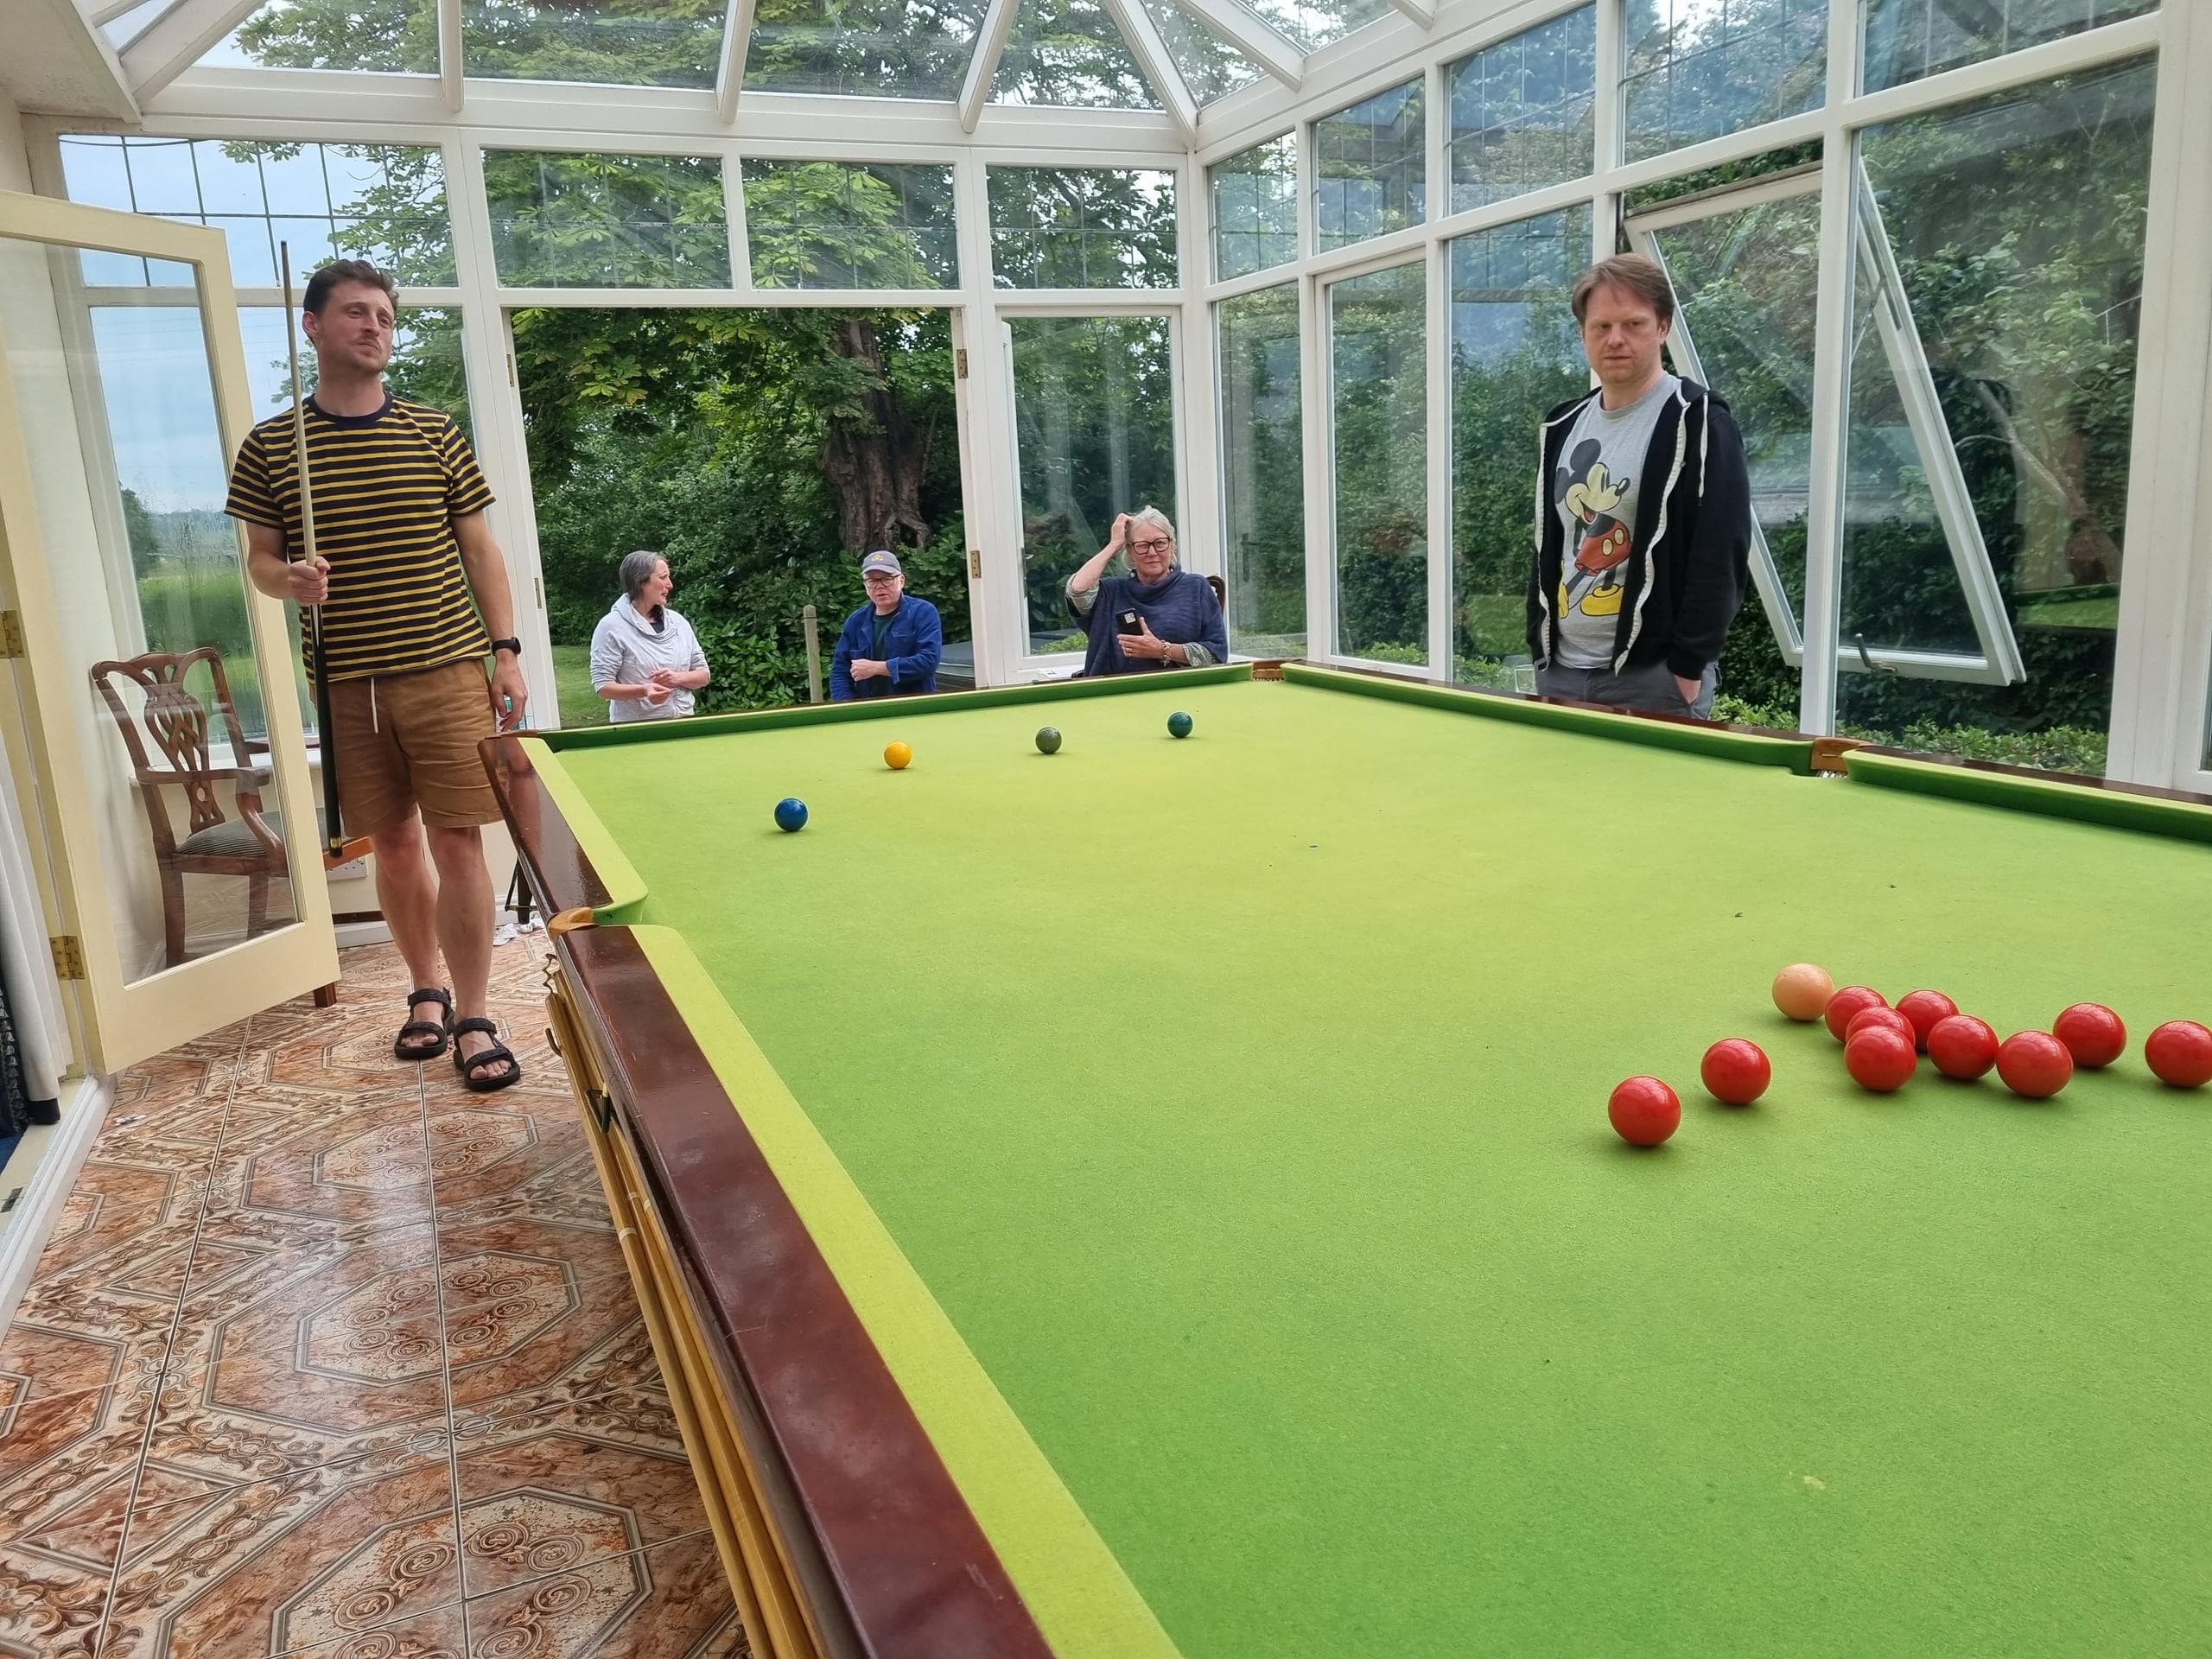 James and Luke playing snooker with the an audience of Maria, Chris and Linda